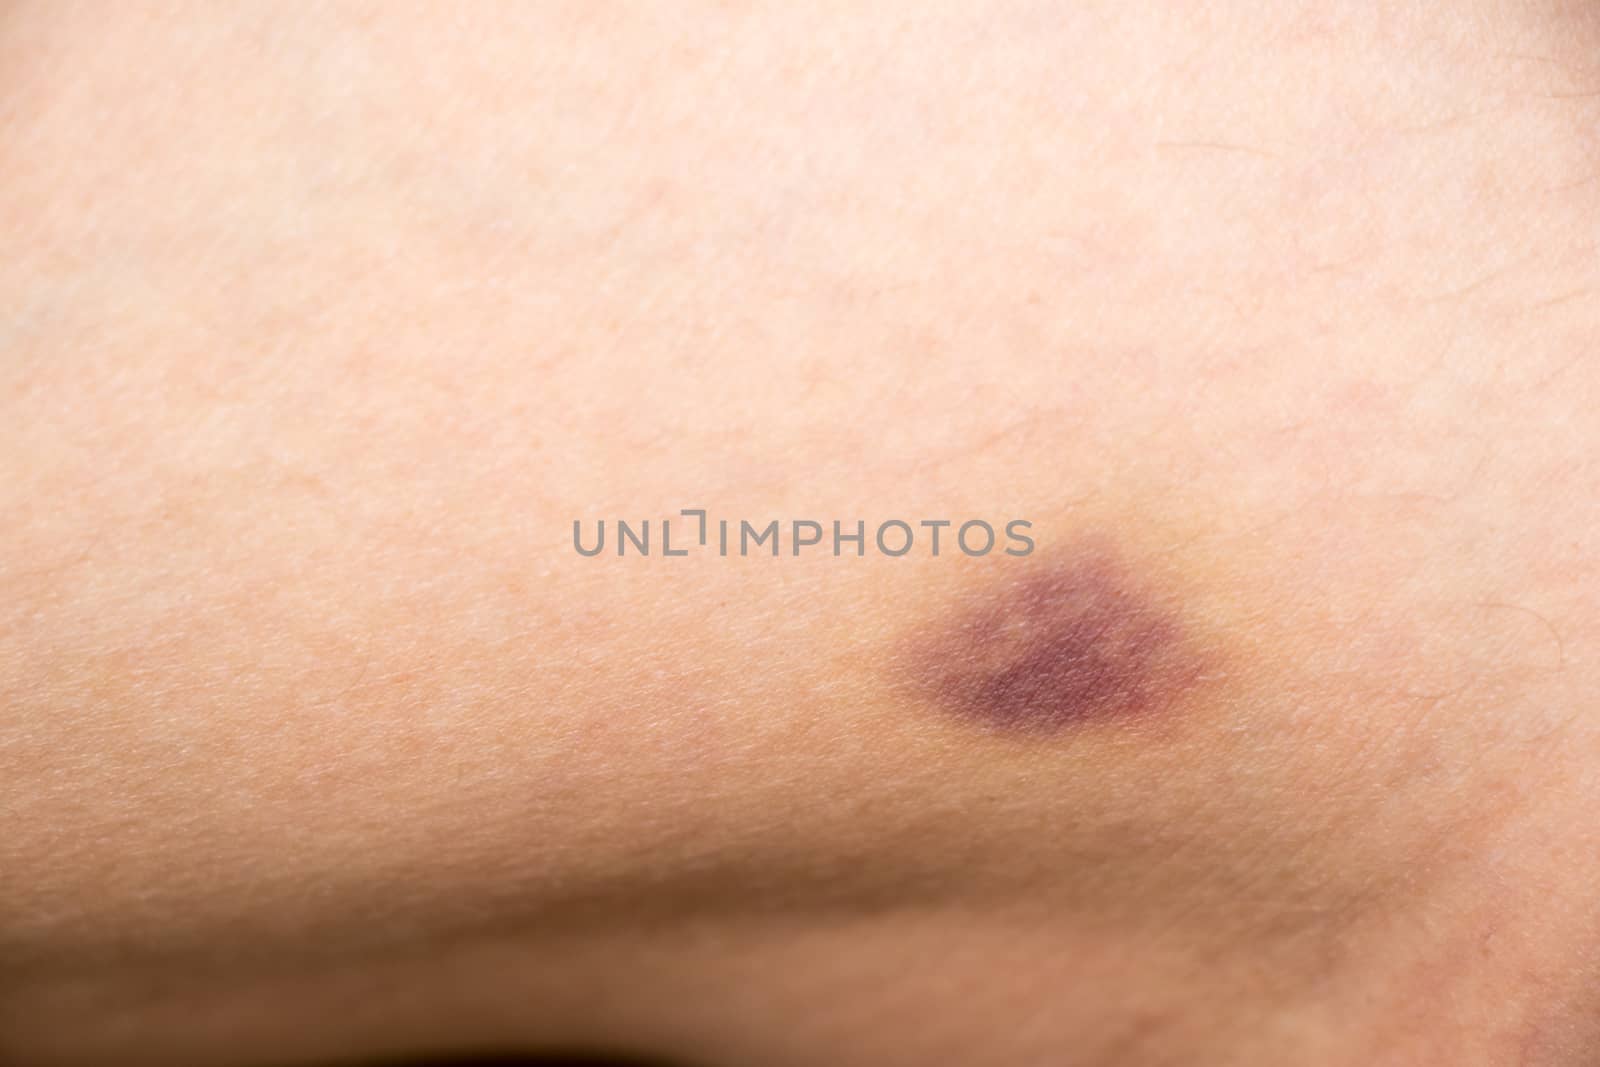 Closed up of bruised injury on woman leg background